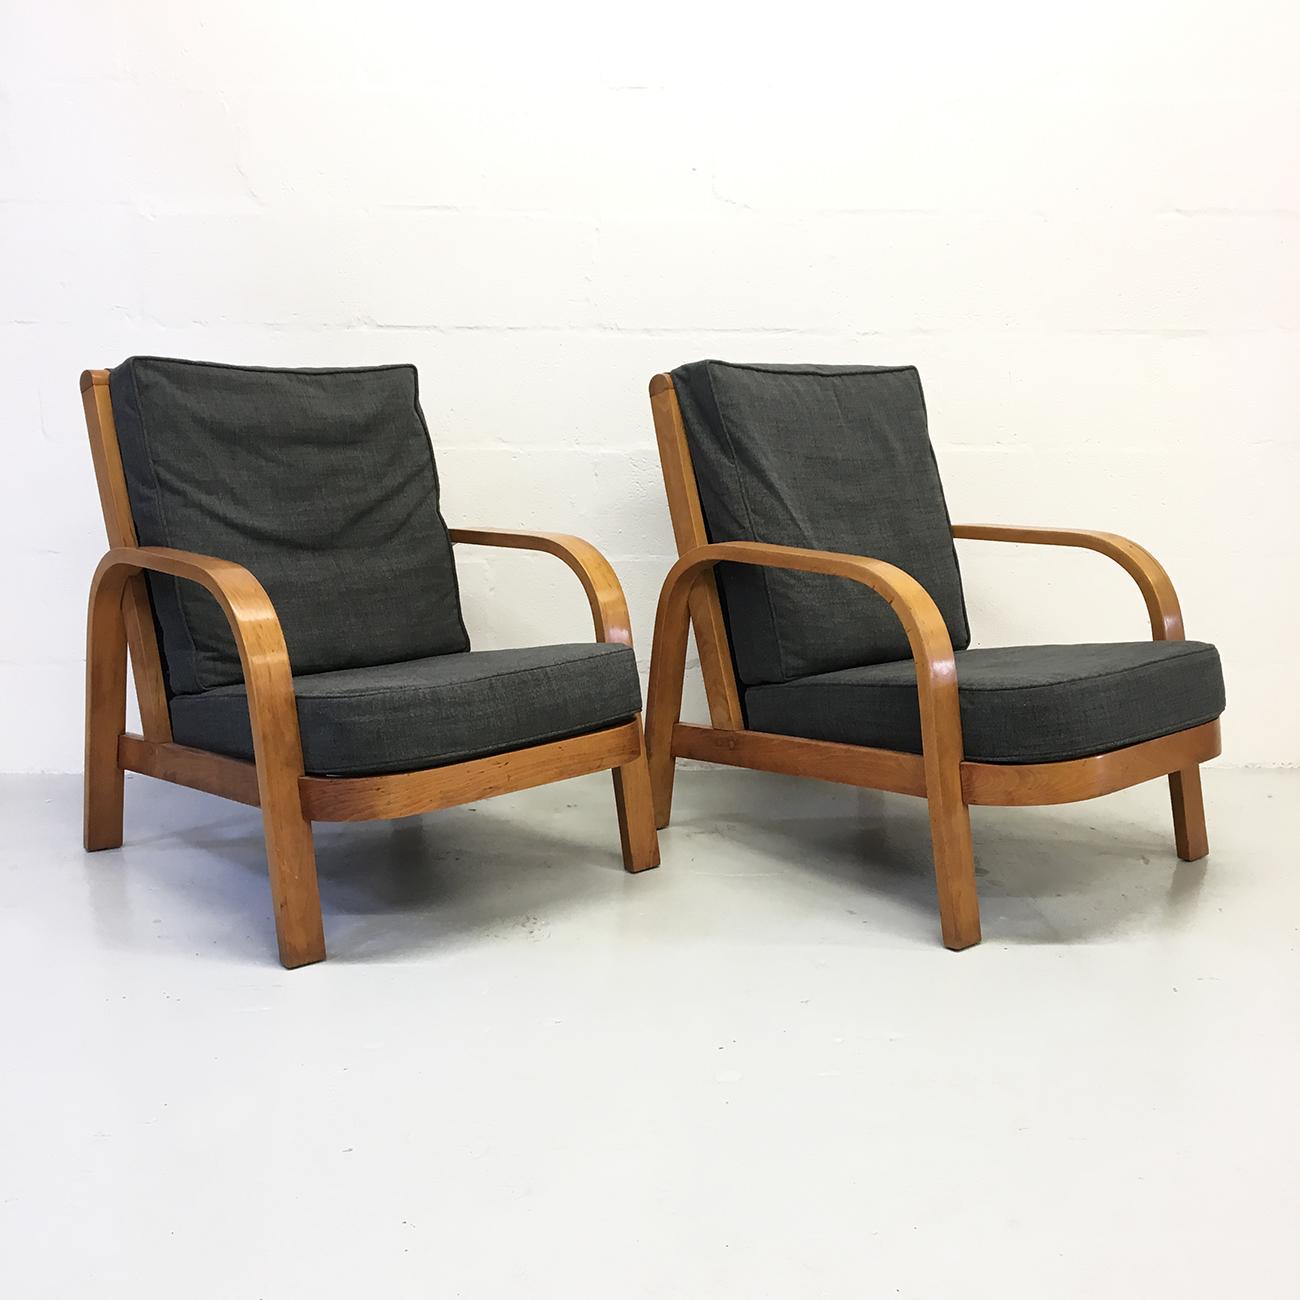 Rare modernist pair of 1930s bentwood ‘Lamda’ chairs by Hein Heckroth for Dartington Hall Limited, Devon, England - part of the ‘Dartside’ range of Modernist furniture.
Designed in 1936, these are an important pair of chairs in the history of